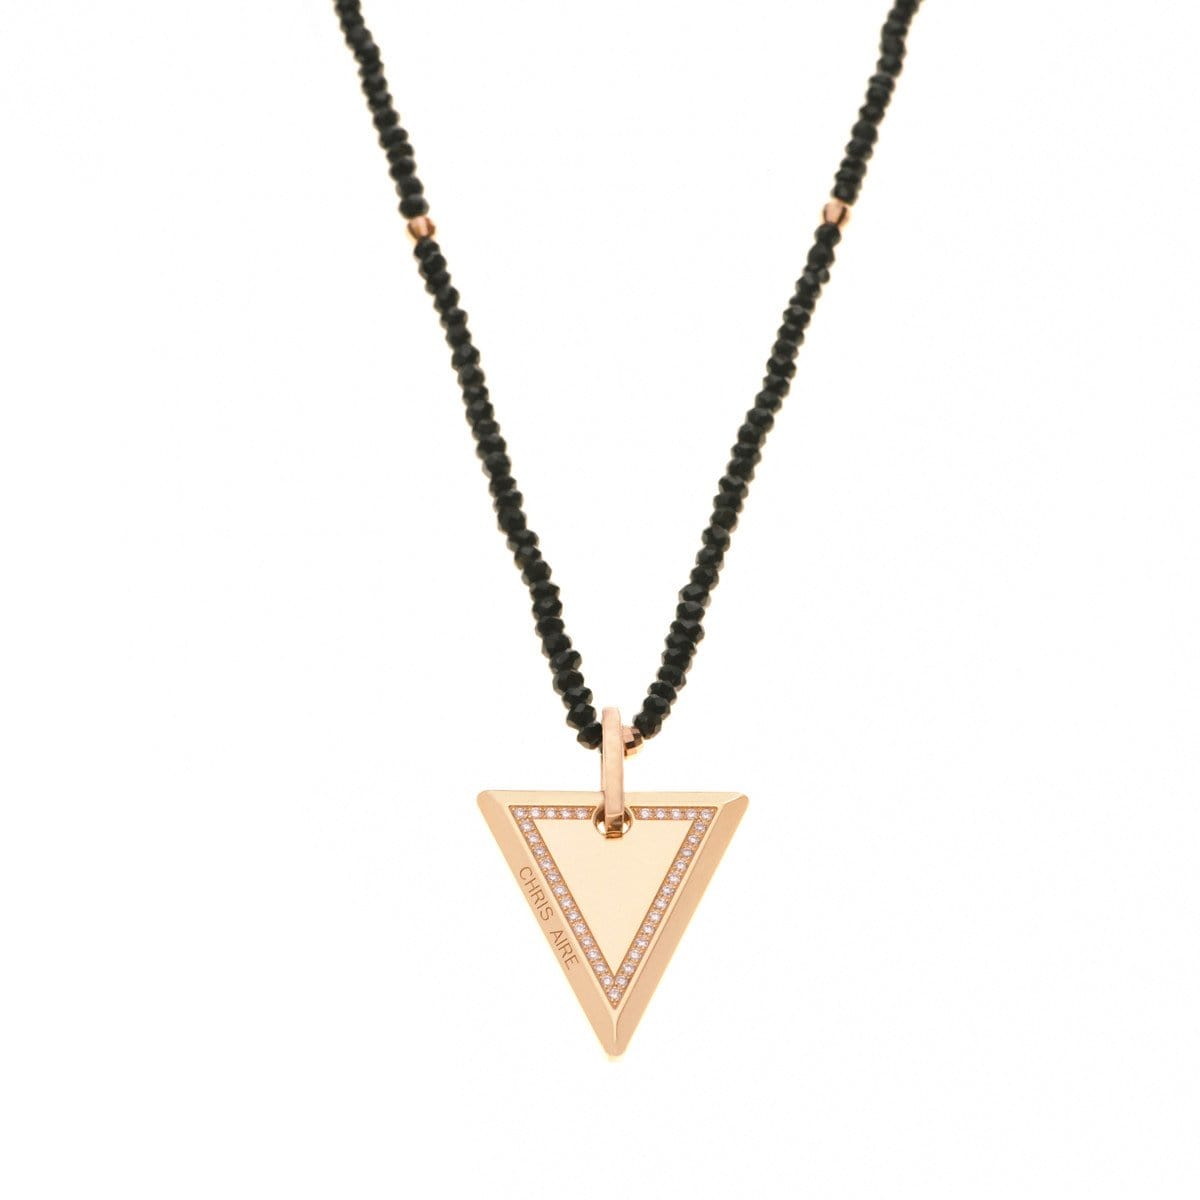 MEDIUM TRI-TAG NECKLACE - Chris Aire Fine Jewelry & Timepieces